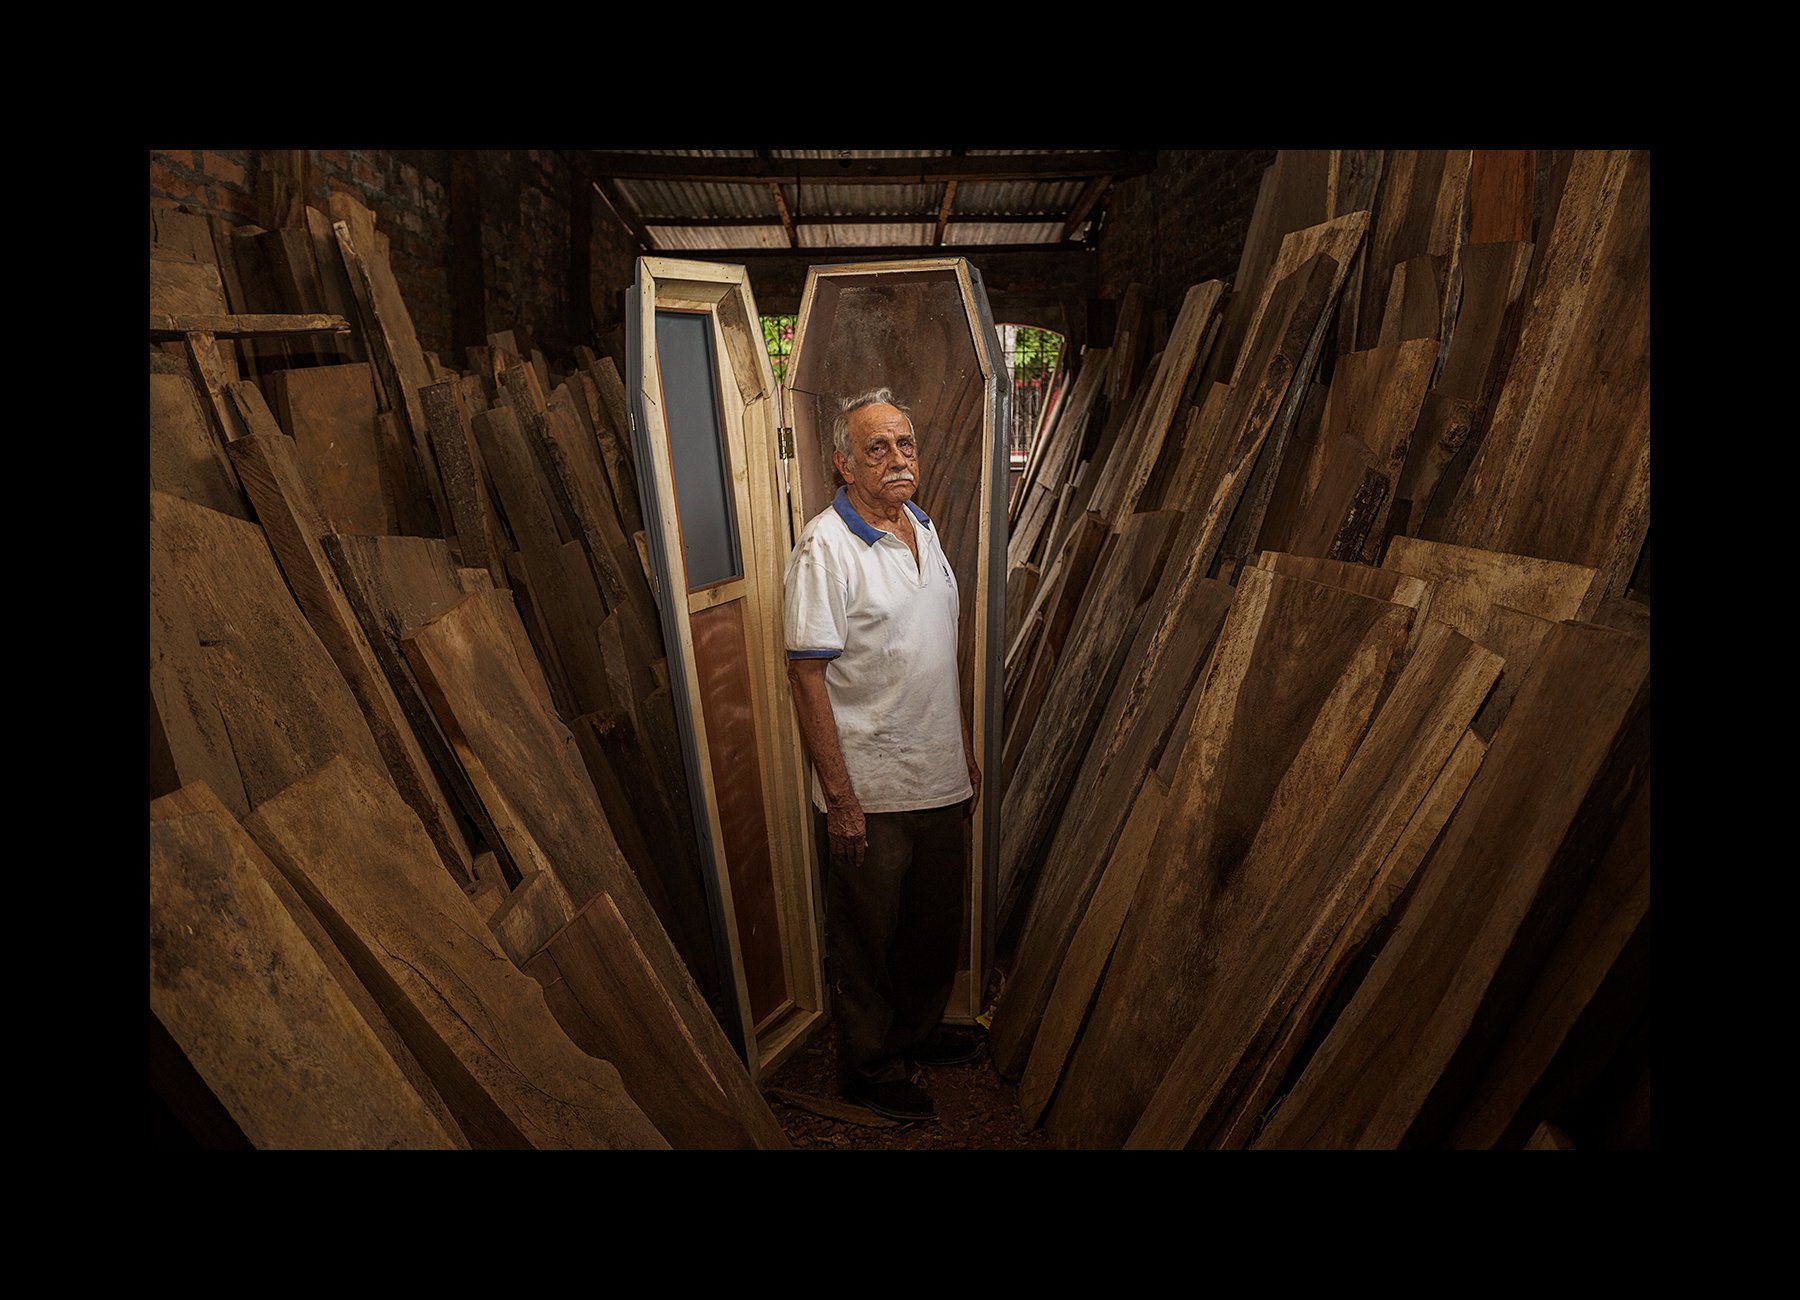  A coffin maker poses in his workshop in Chichigalpa, Nicaragua on Jan. 7, 2013.  